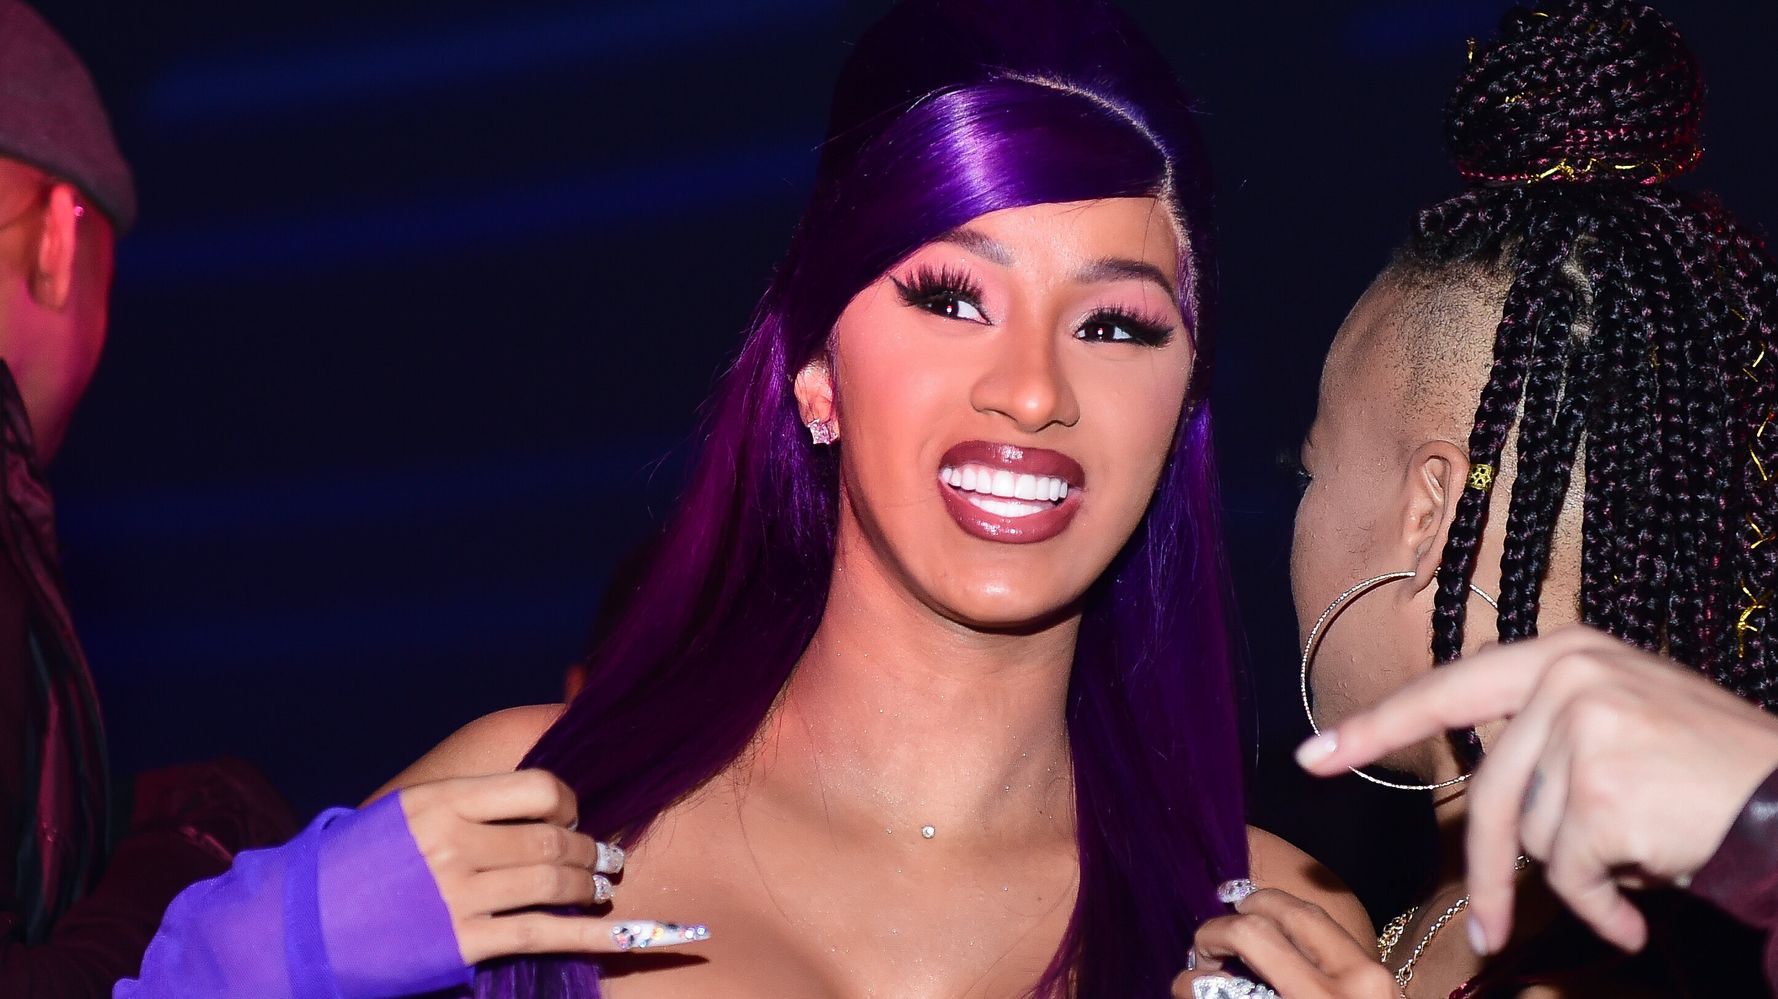 Image result for Cardi B Says She’s ‘Scared’ About Coronavirus: ‘S**t Got Me Panicking’